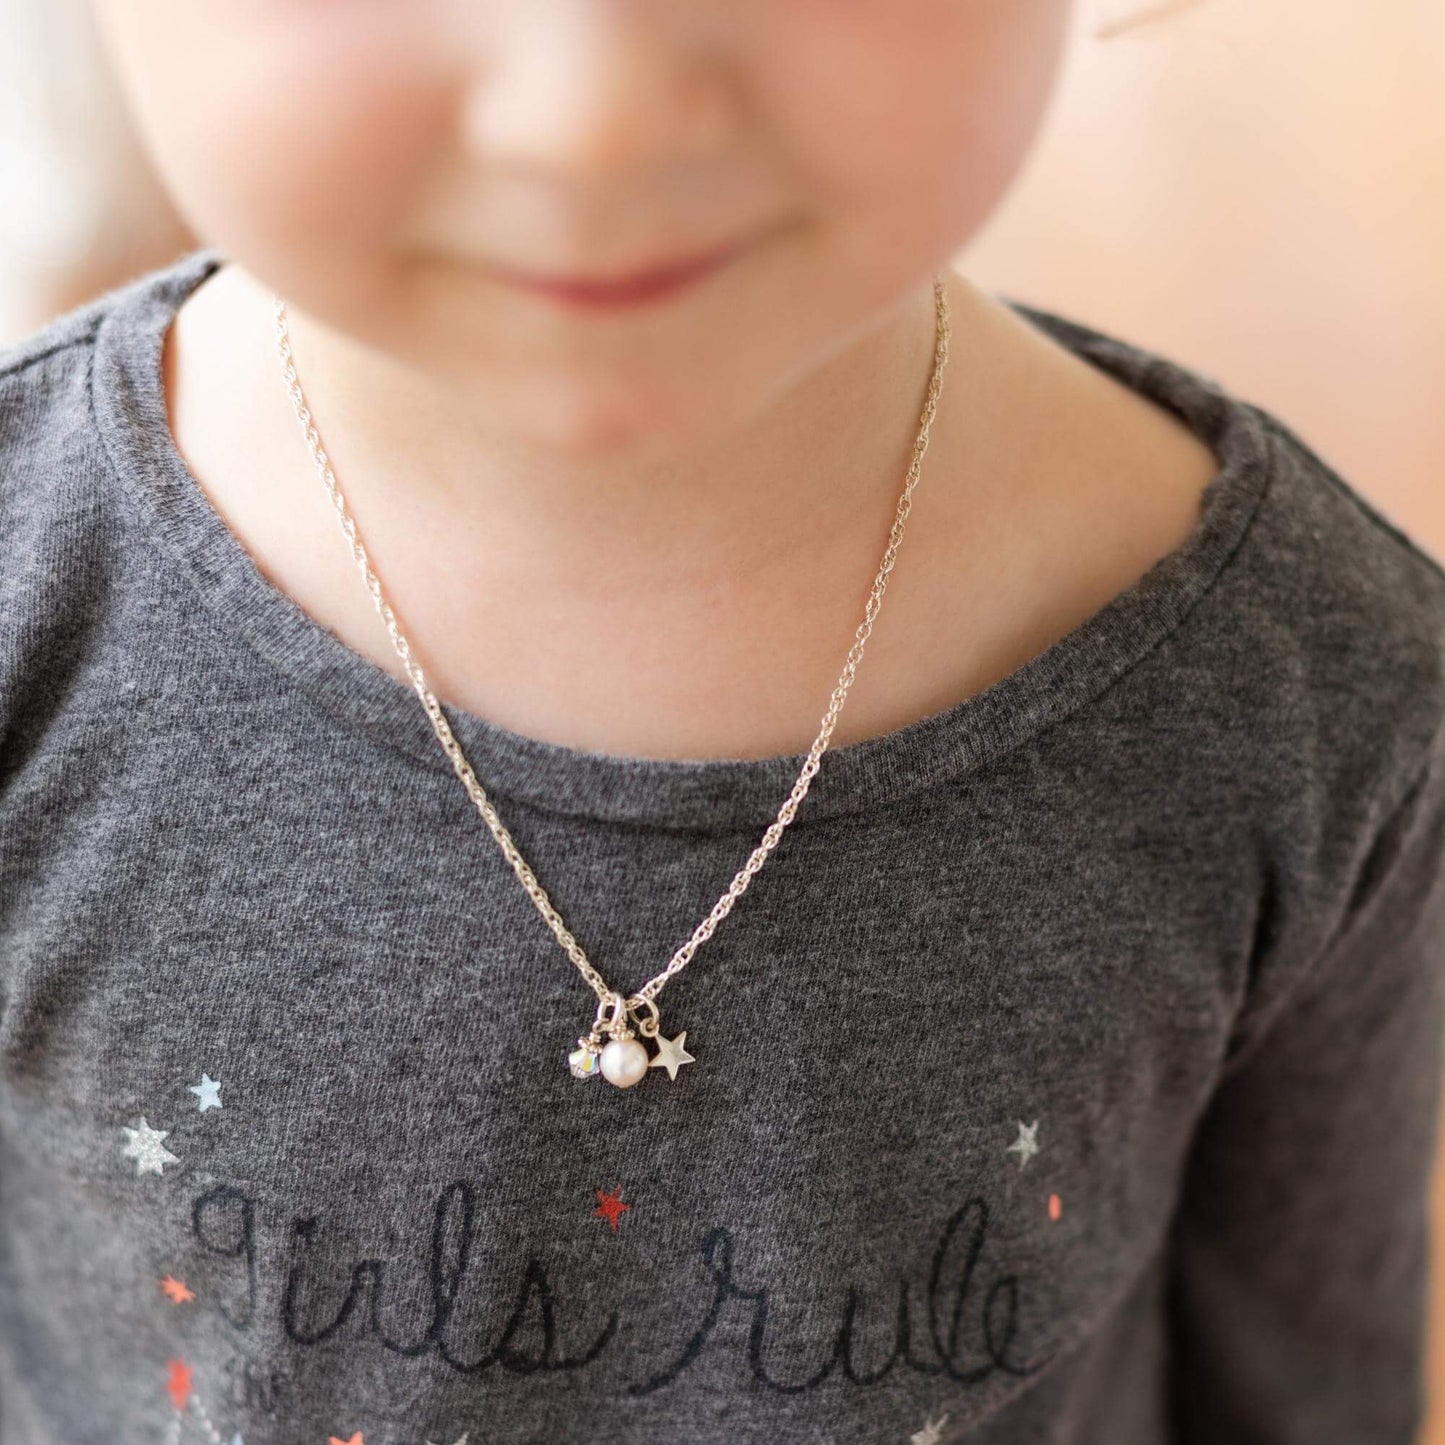 Reach for the Stars Necklace in Sterling Silver